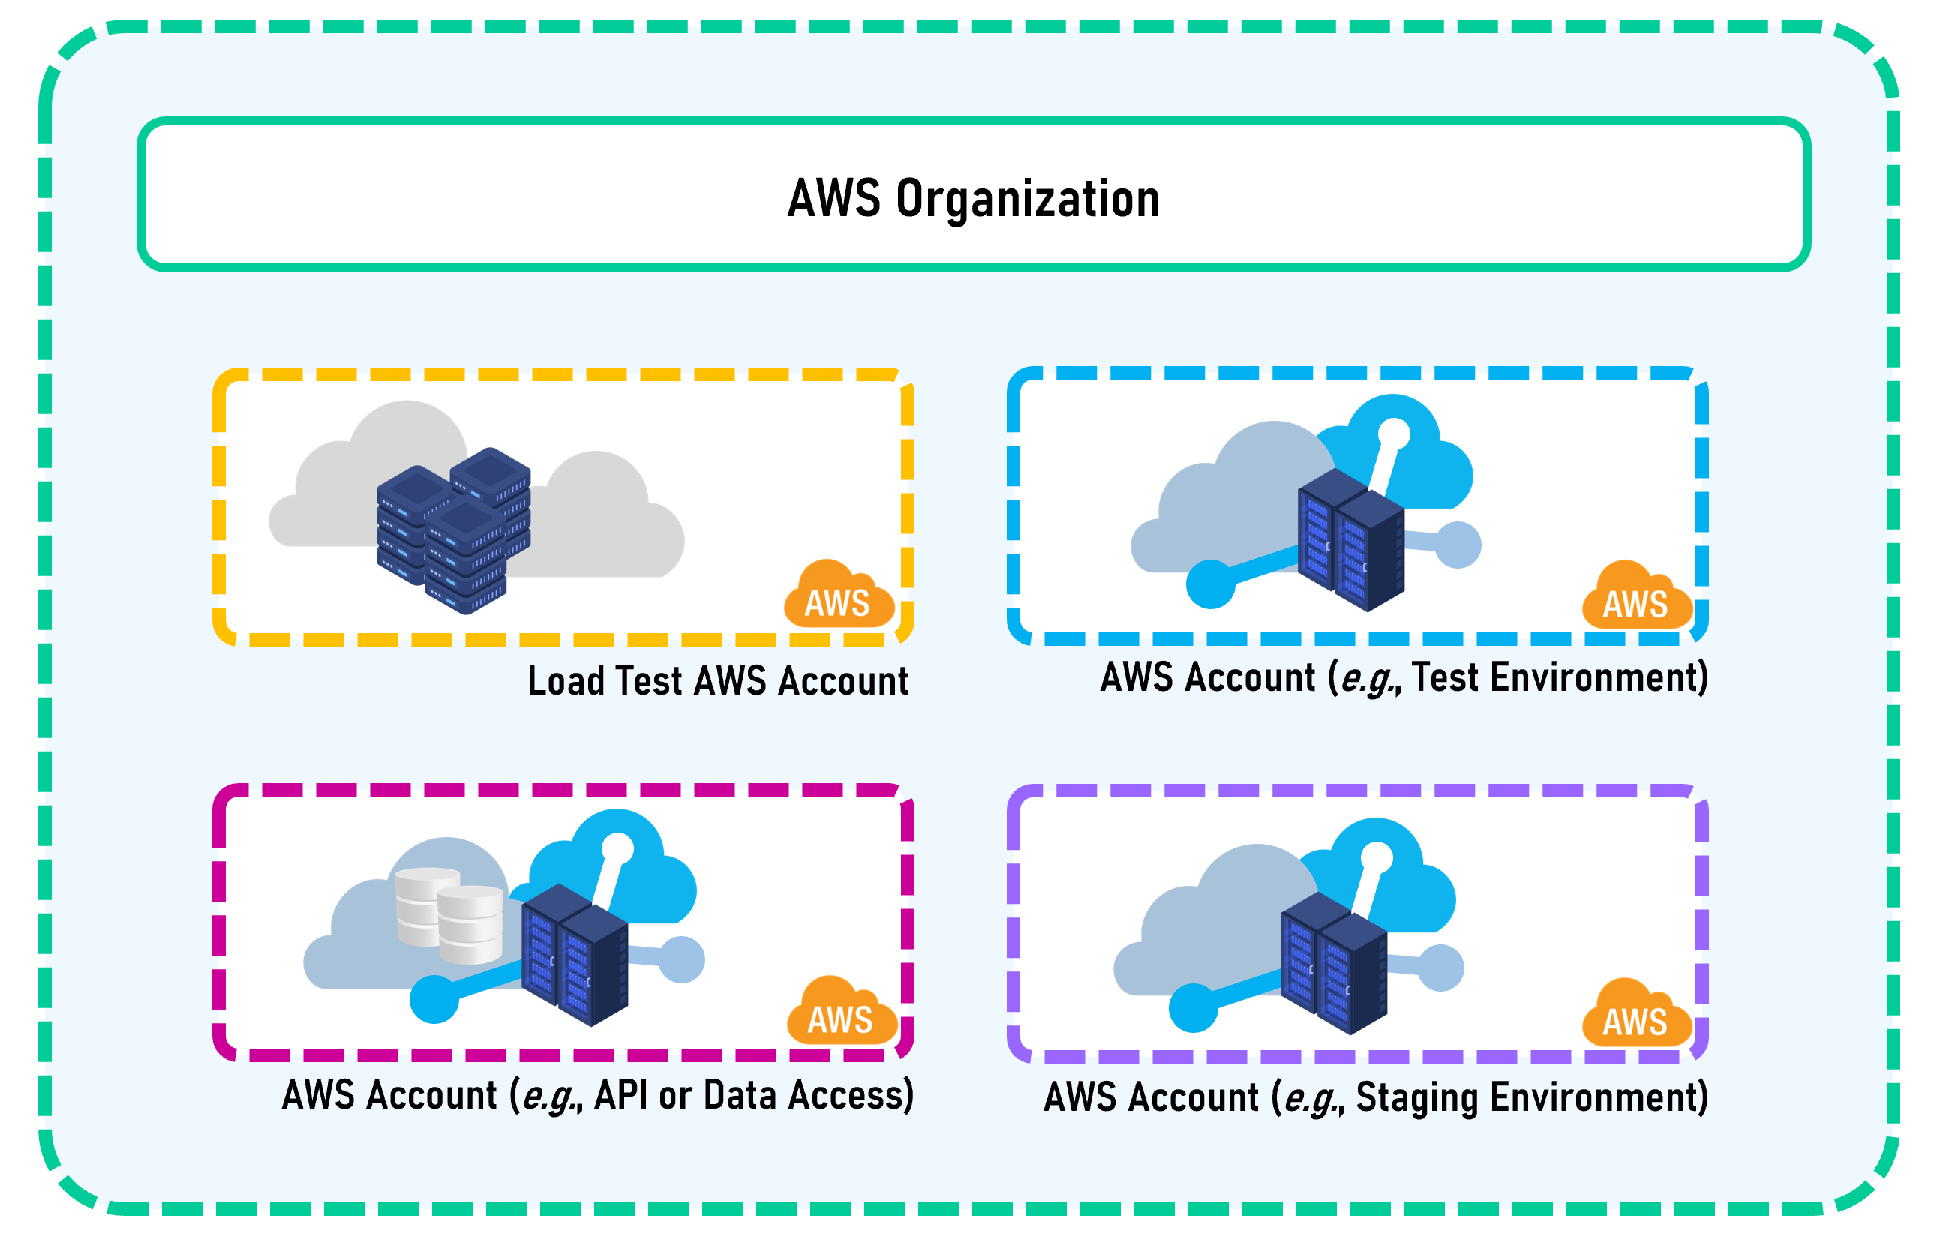 Multiple AWS accounts can be placed under a single Organization for ease of management